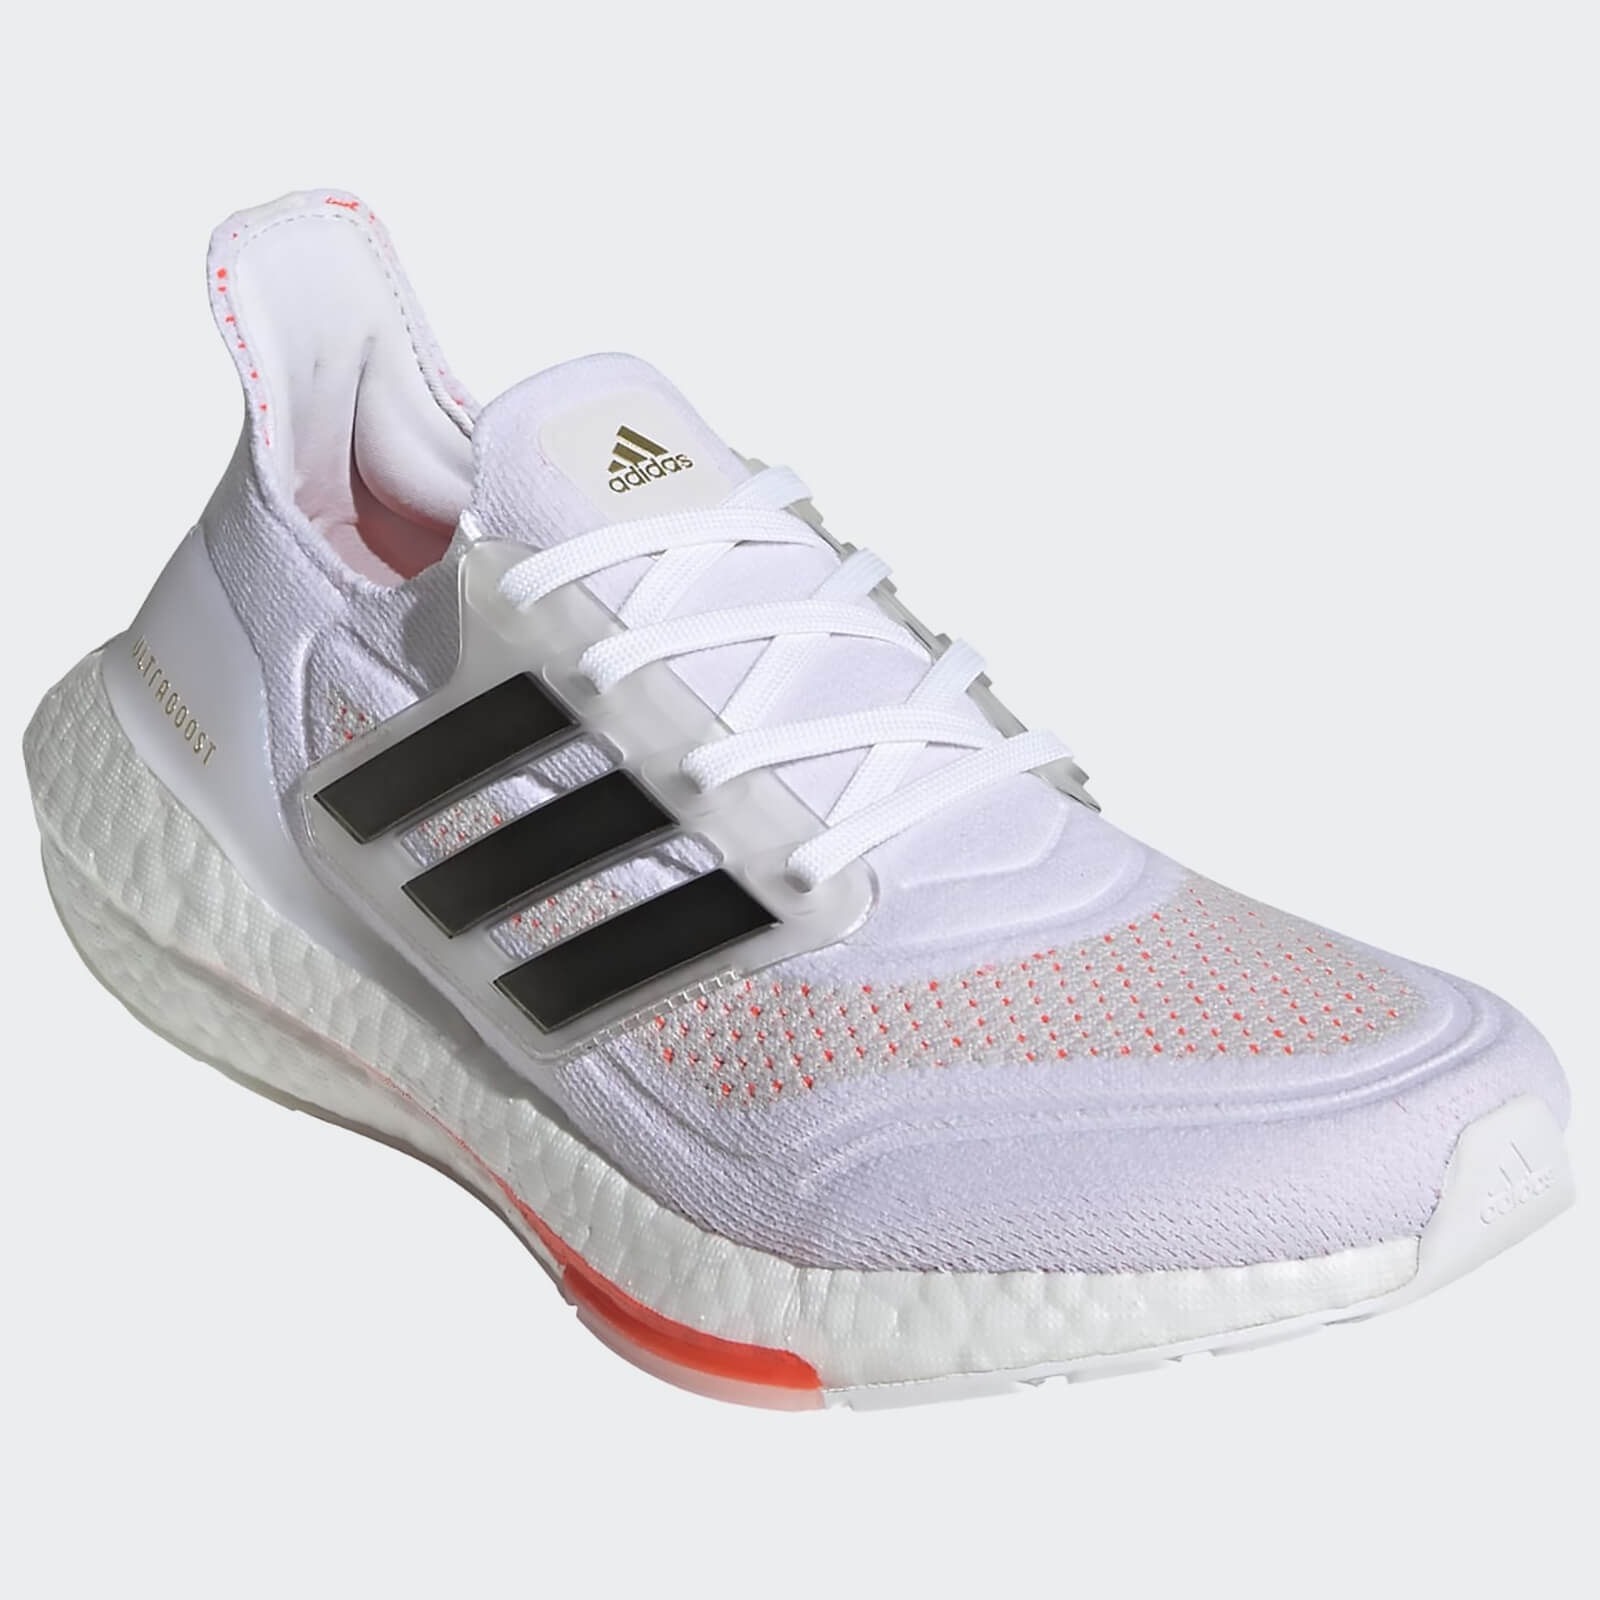 adidas Women's Ultra Boost 21 Running Shoes - Ftwr White/Core Black/Solar Red - US 5.5/UK 4